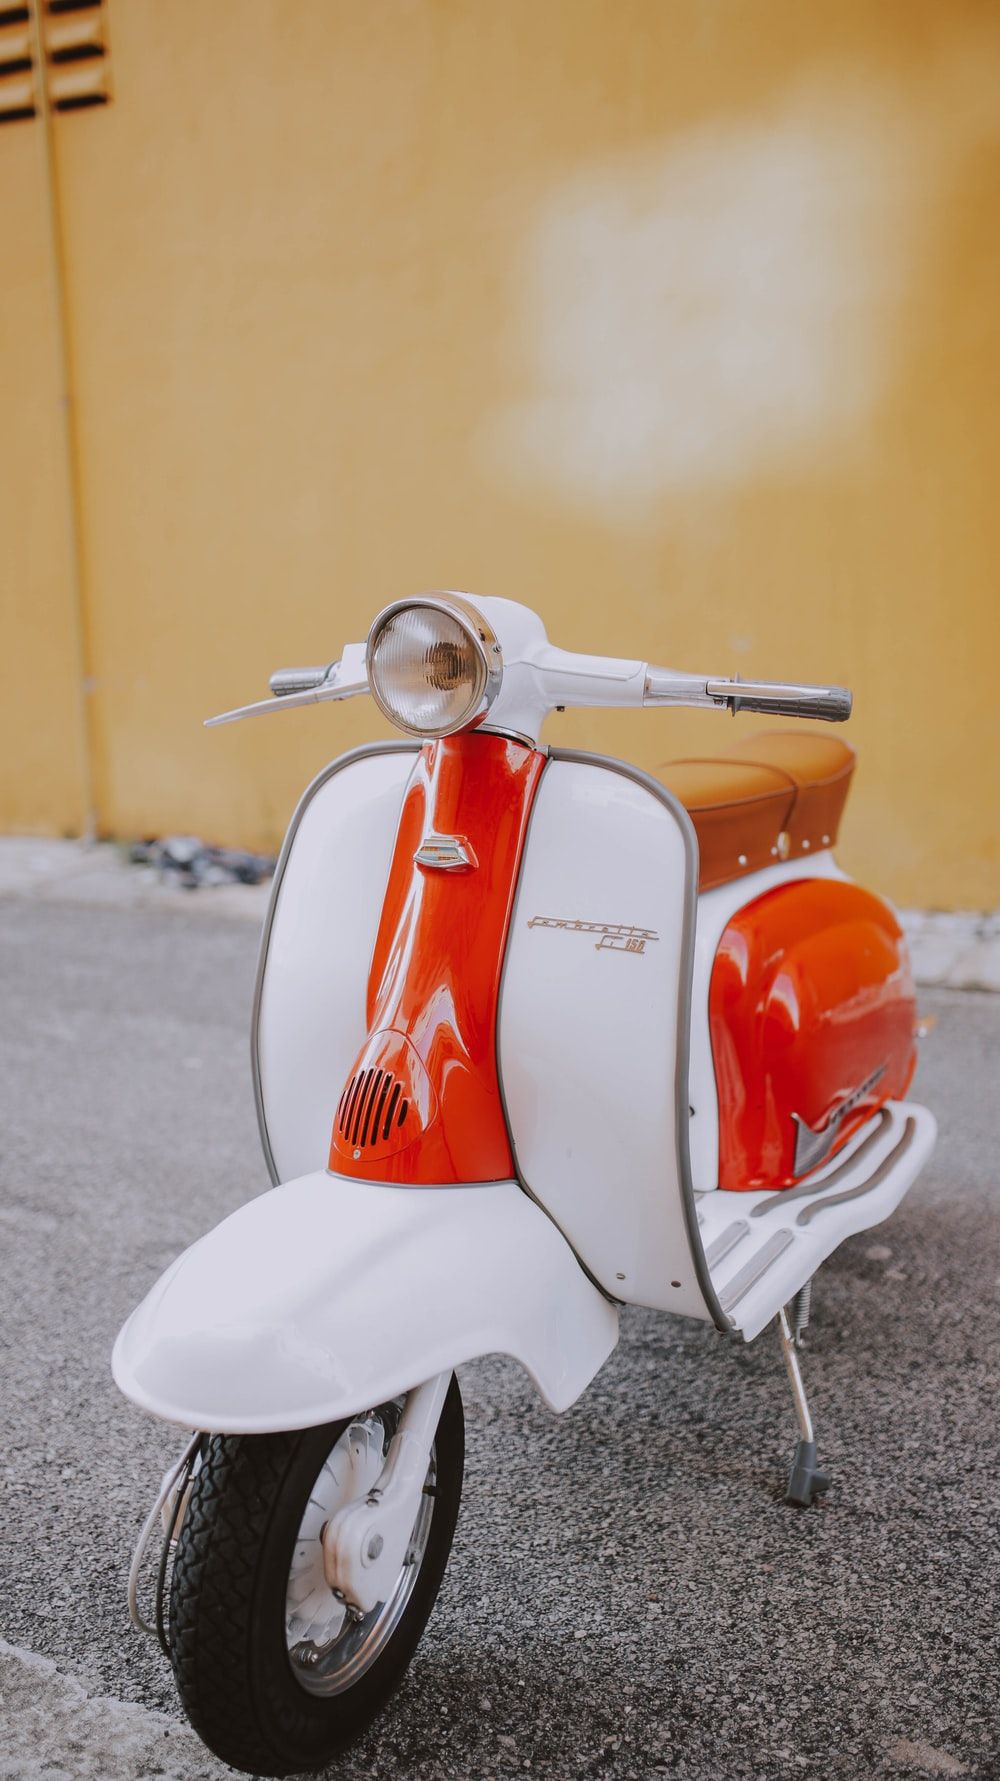 Scooter Picture [HD]. Download Free Image